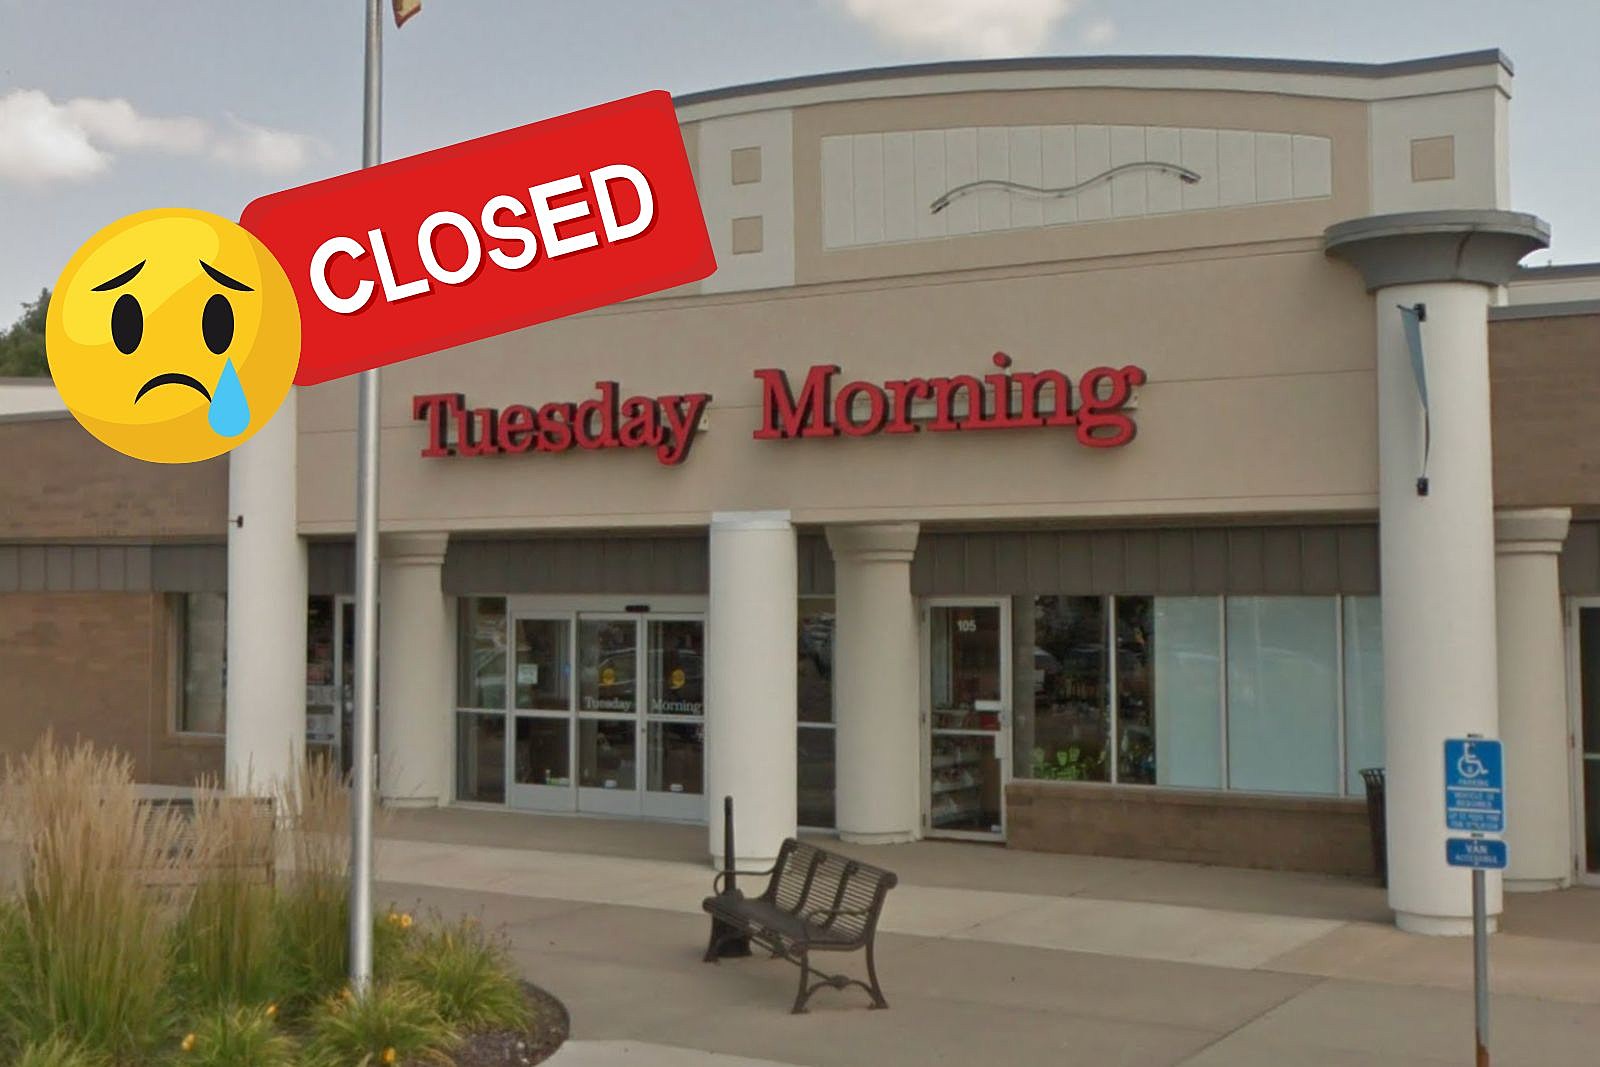 Tuesday Morning closing its Champaign store, Retail